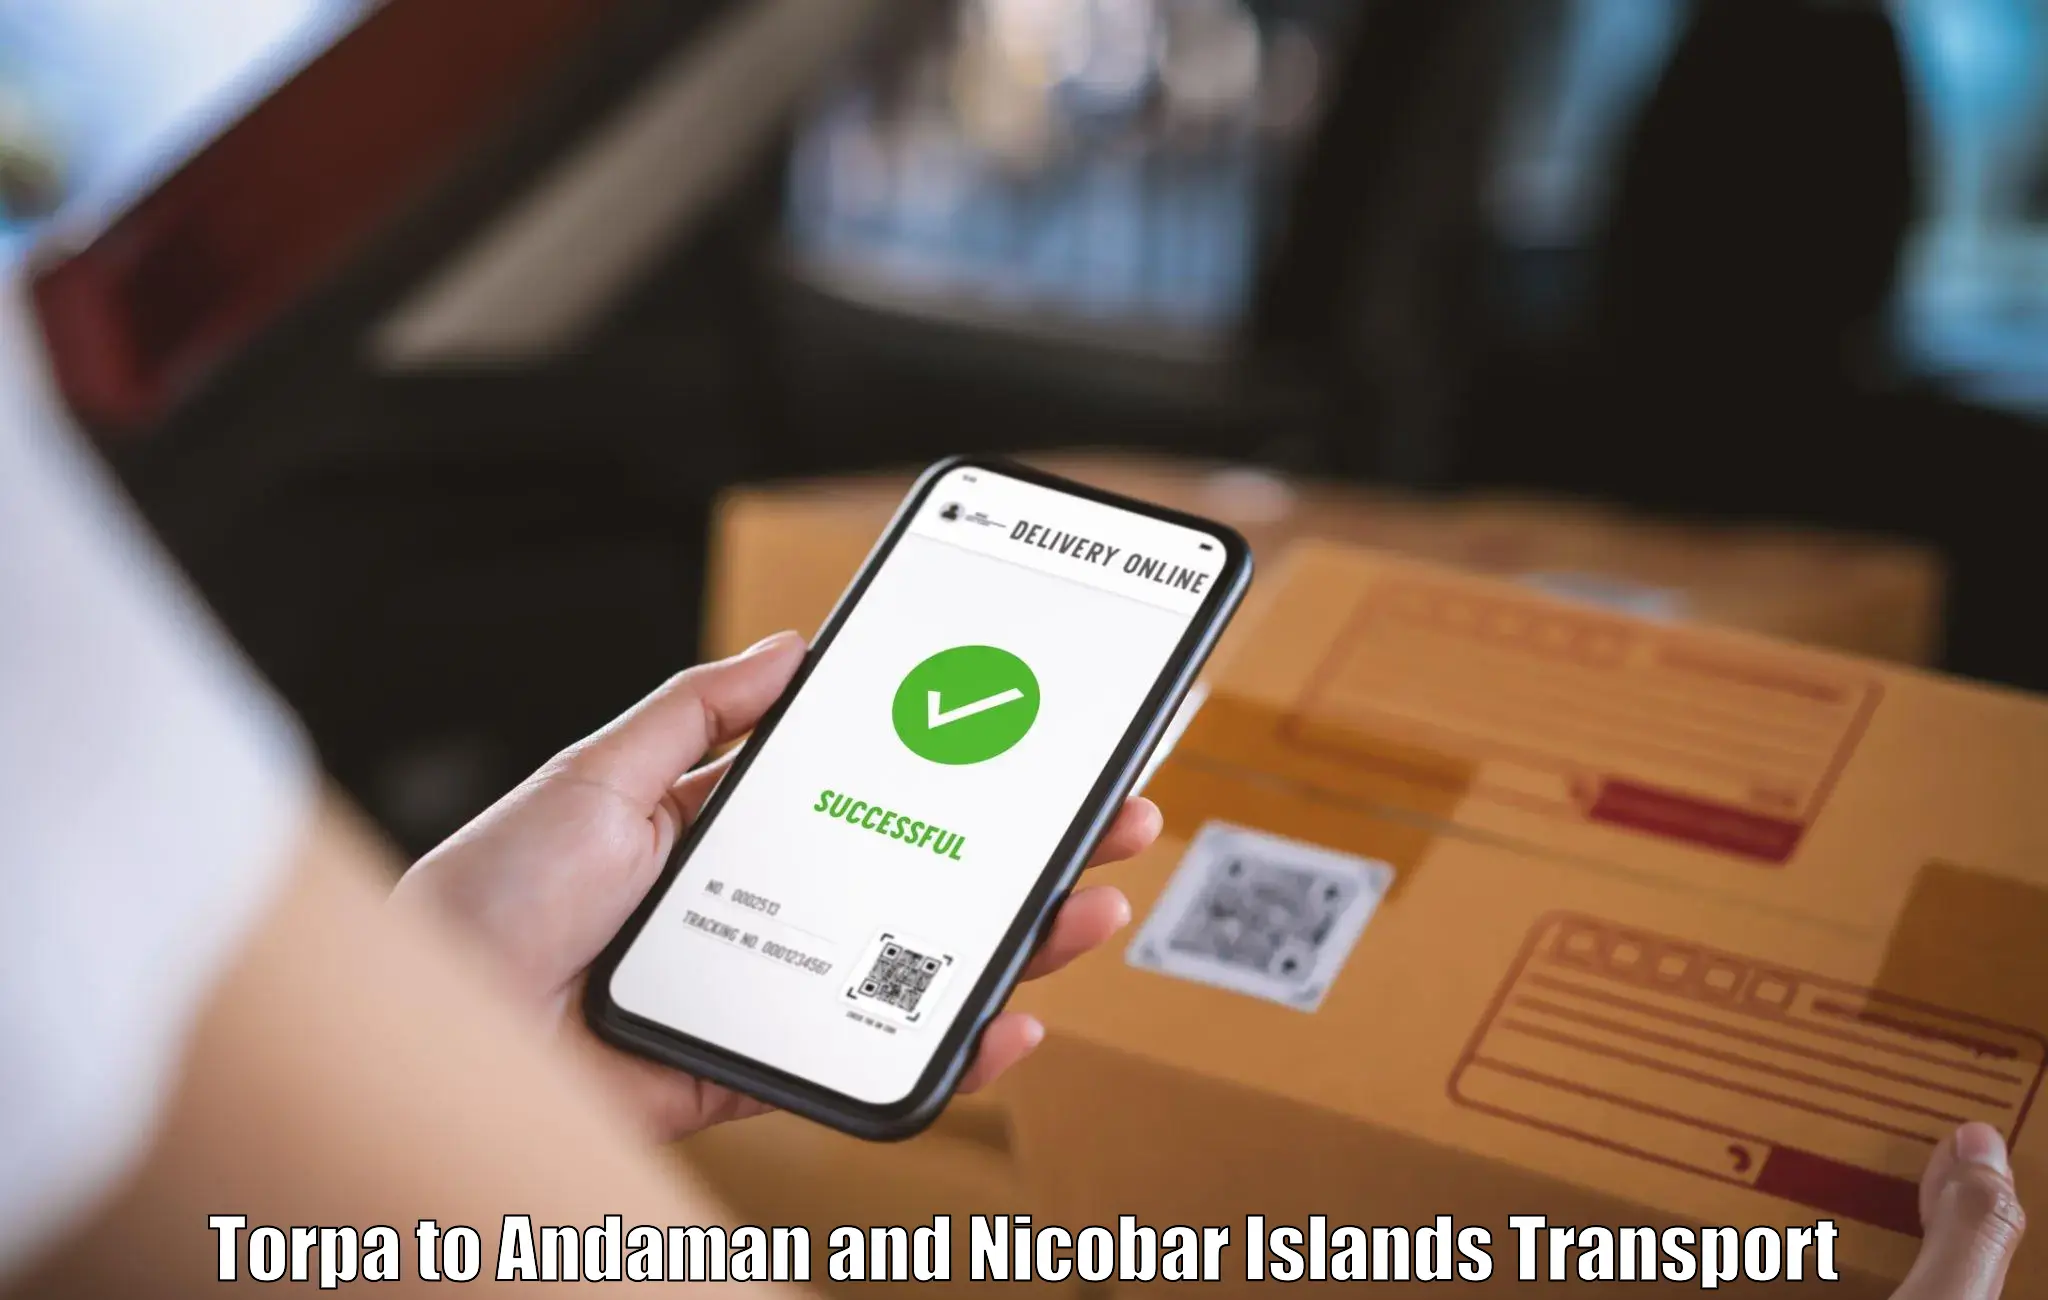 Commercial transport service Torpa to Andaman and Nicobar Islands